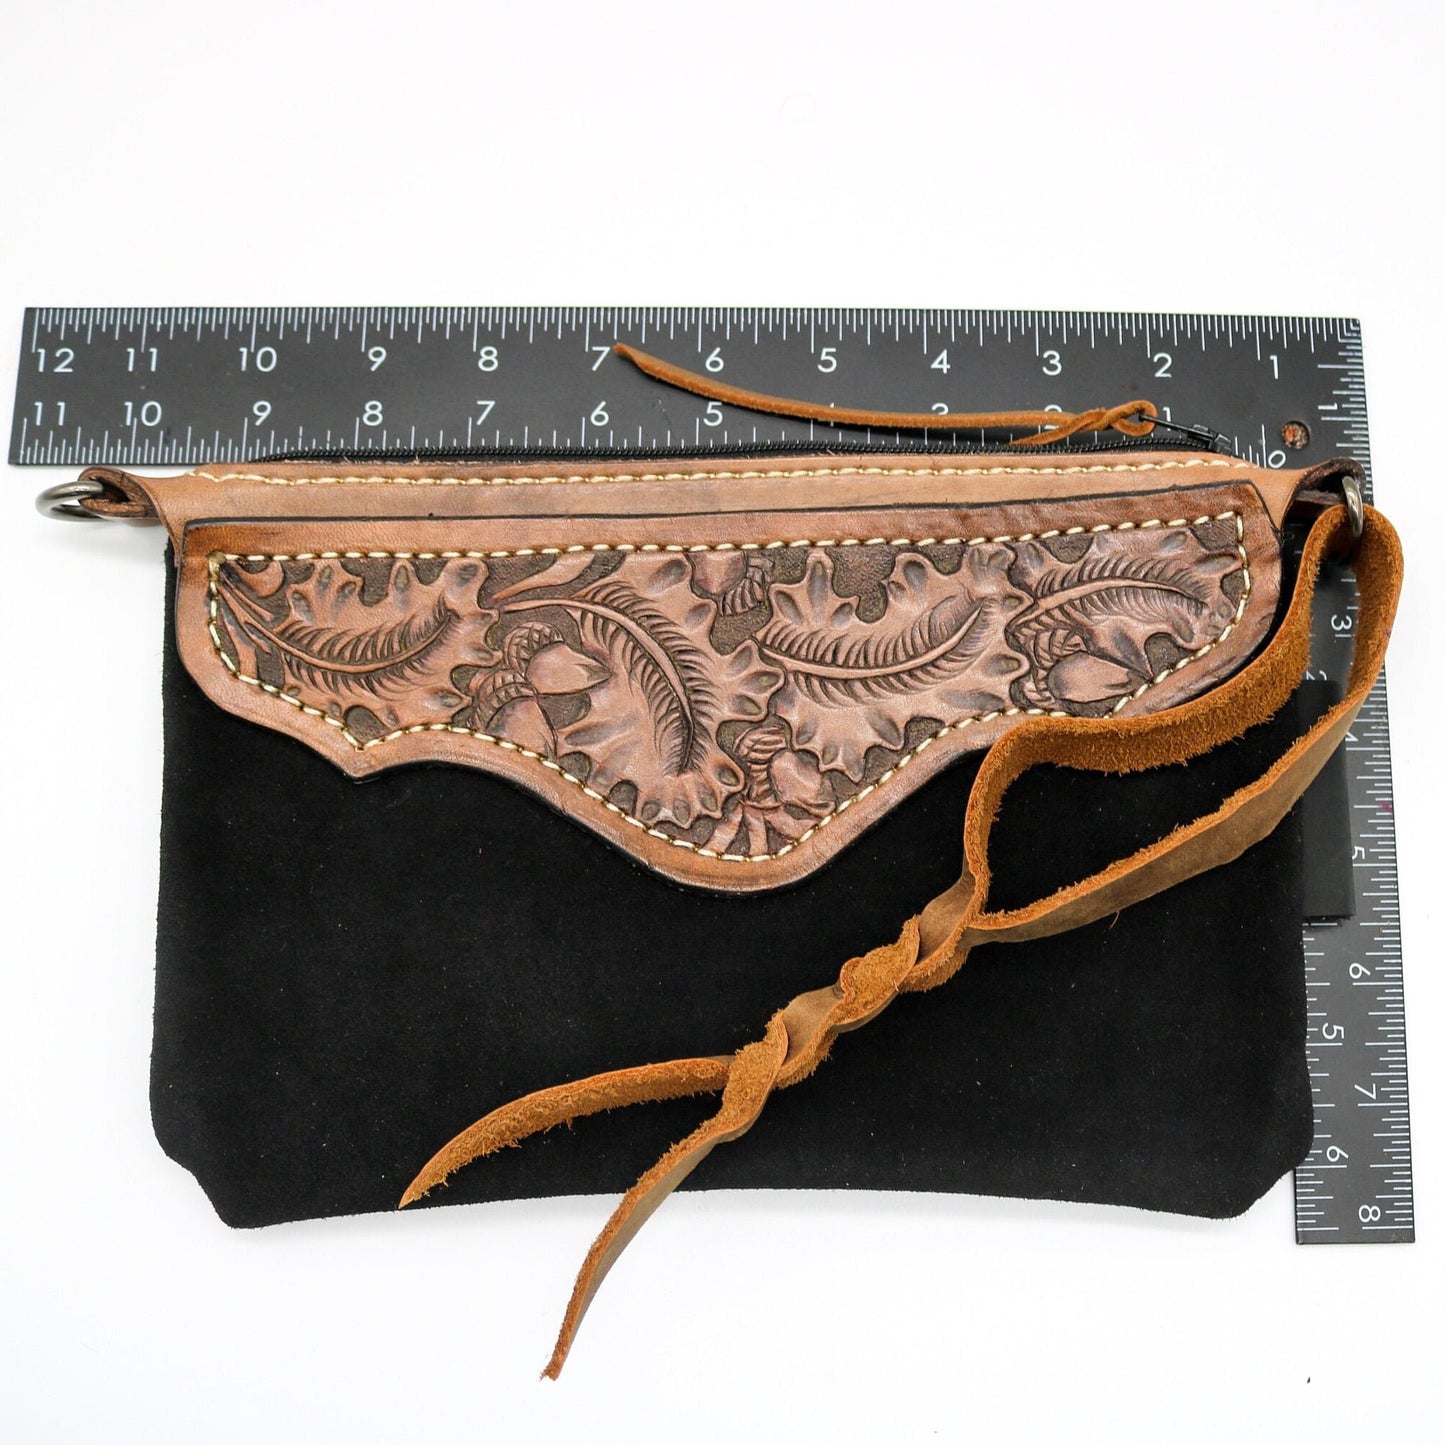 Small Western Leather Wristlet Clutch - Leather Crossbody Bag, Western Purse, Handbag Clutch, Rodeo Wallet Womens Hand Tooled